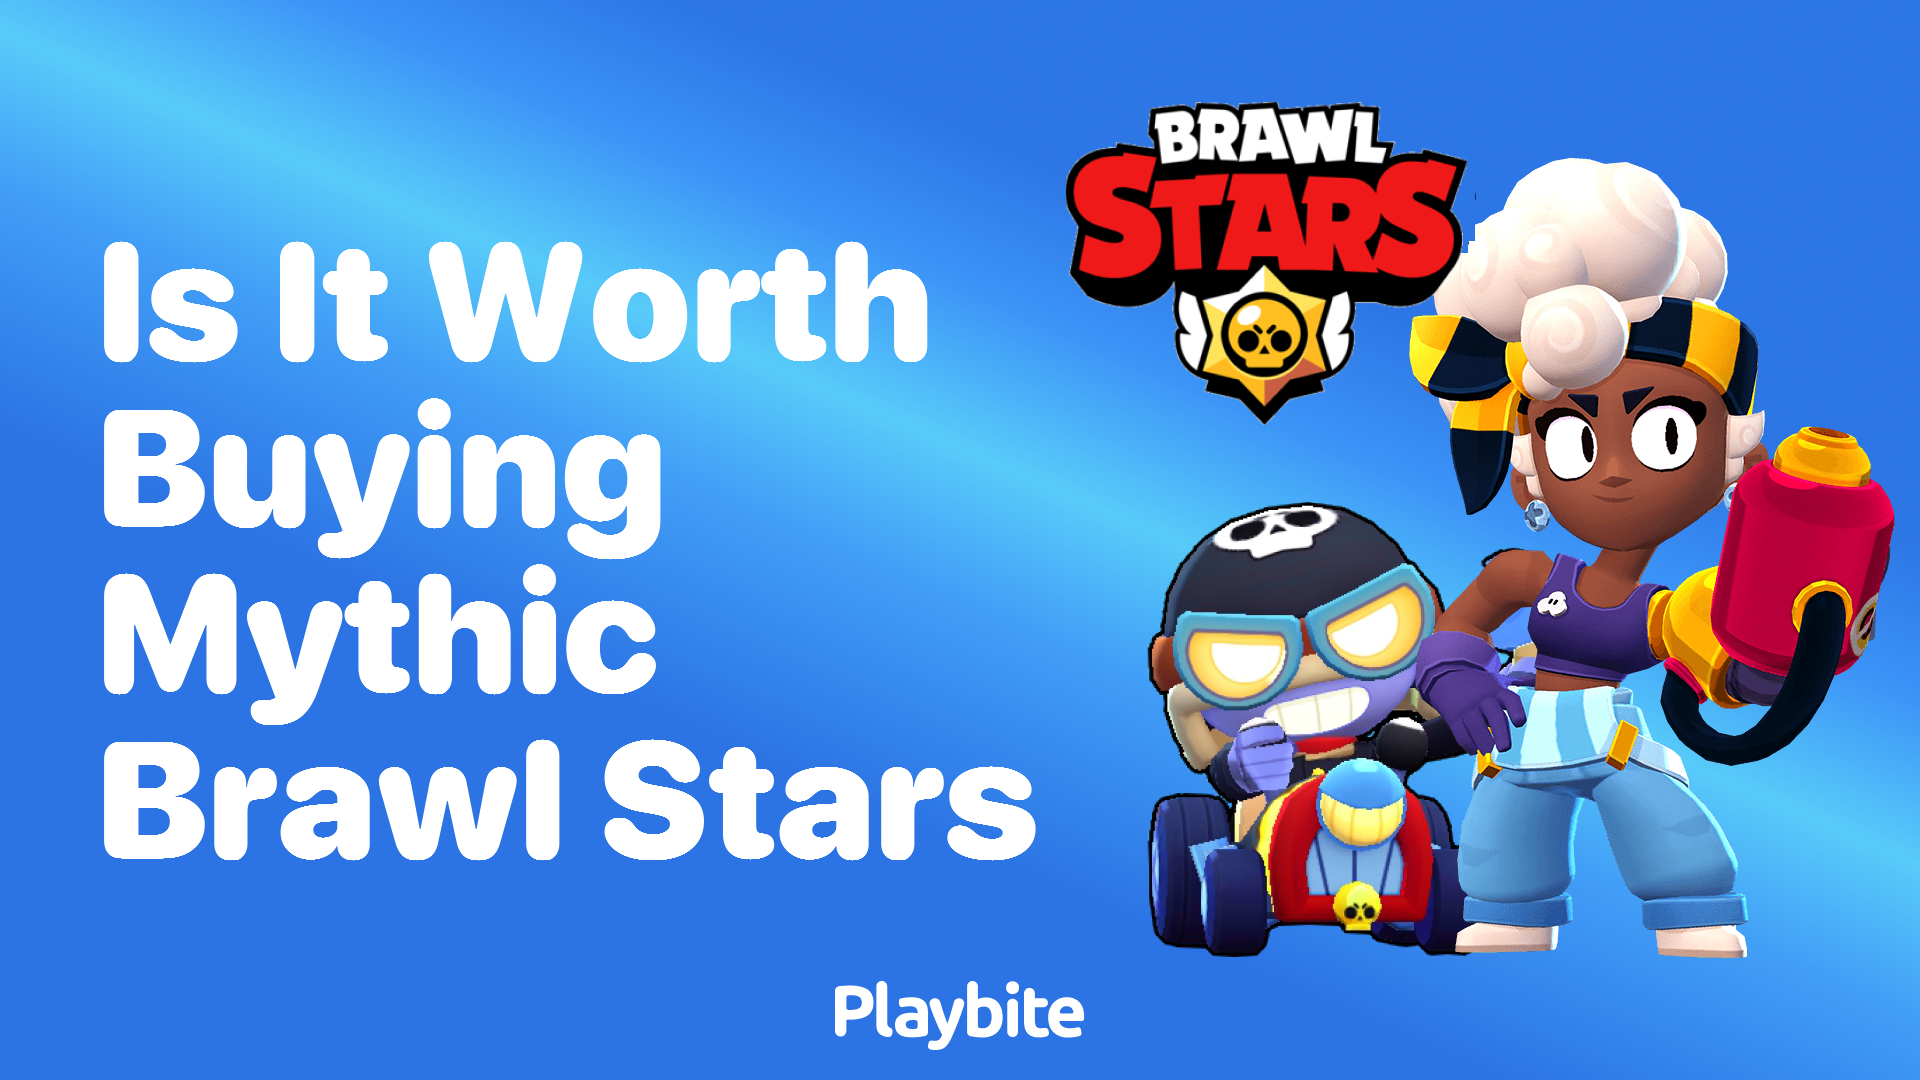 Brawlpass Plus is officially in the Supercell Store : r/Brawlstars